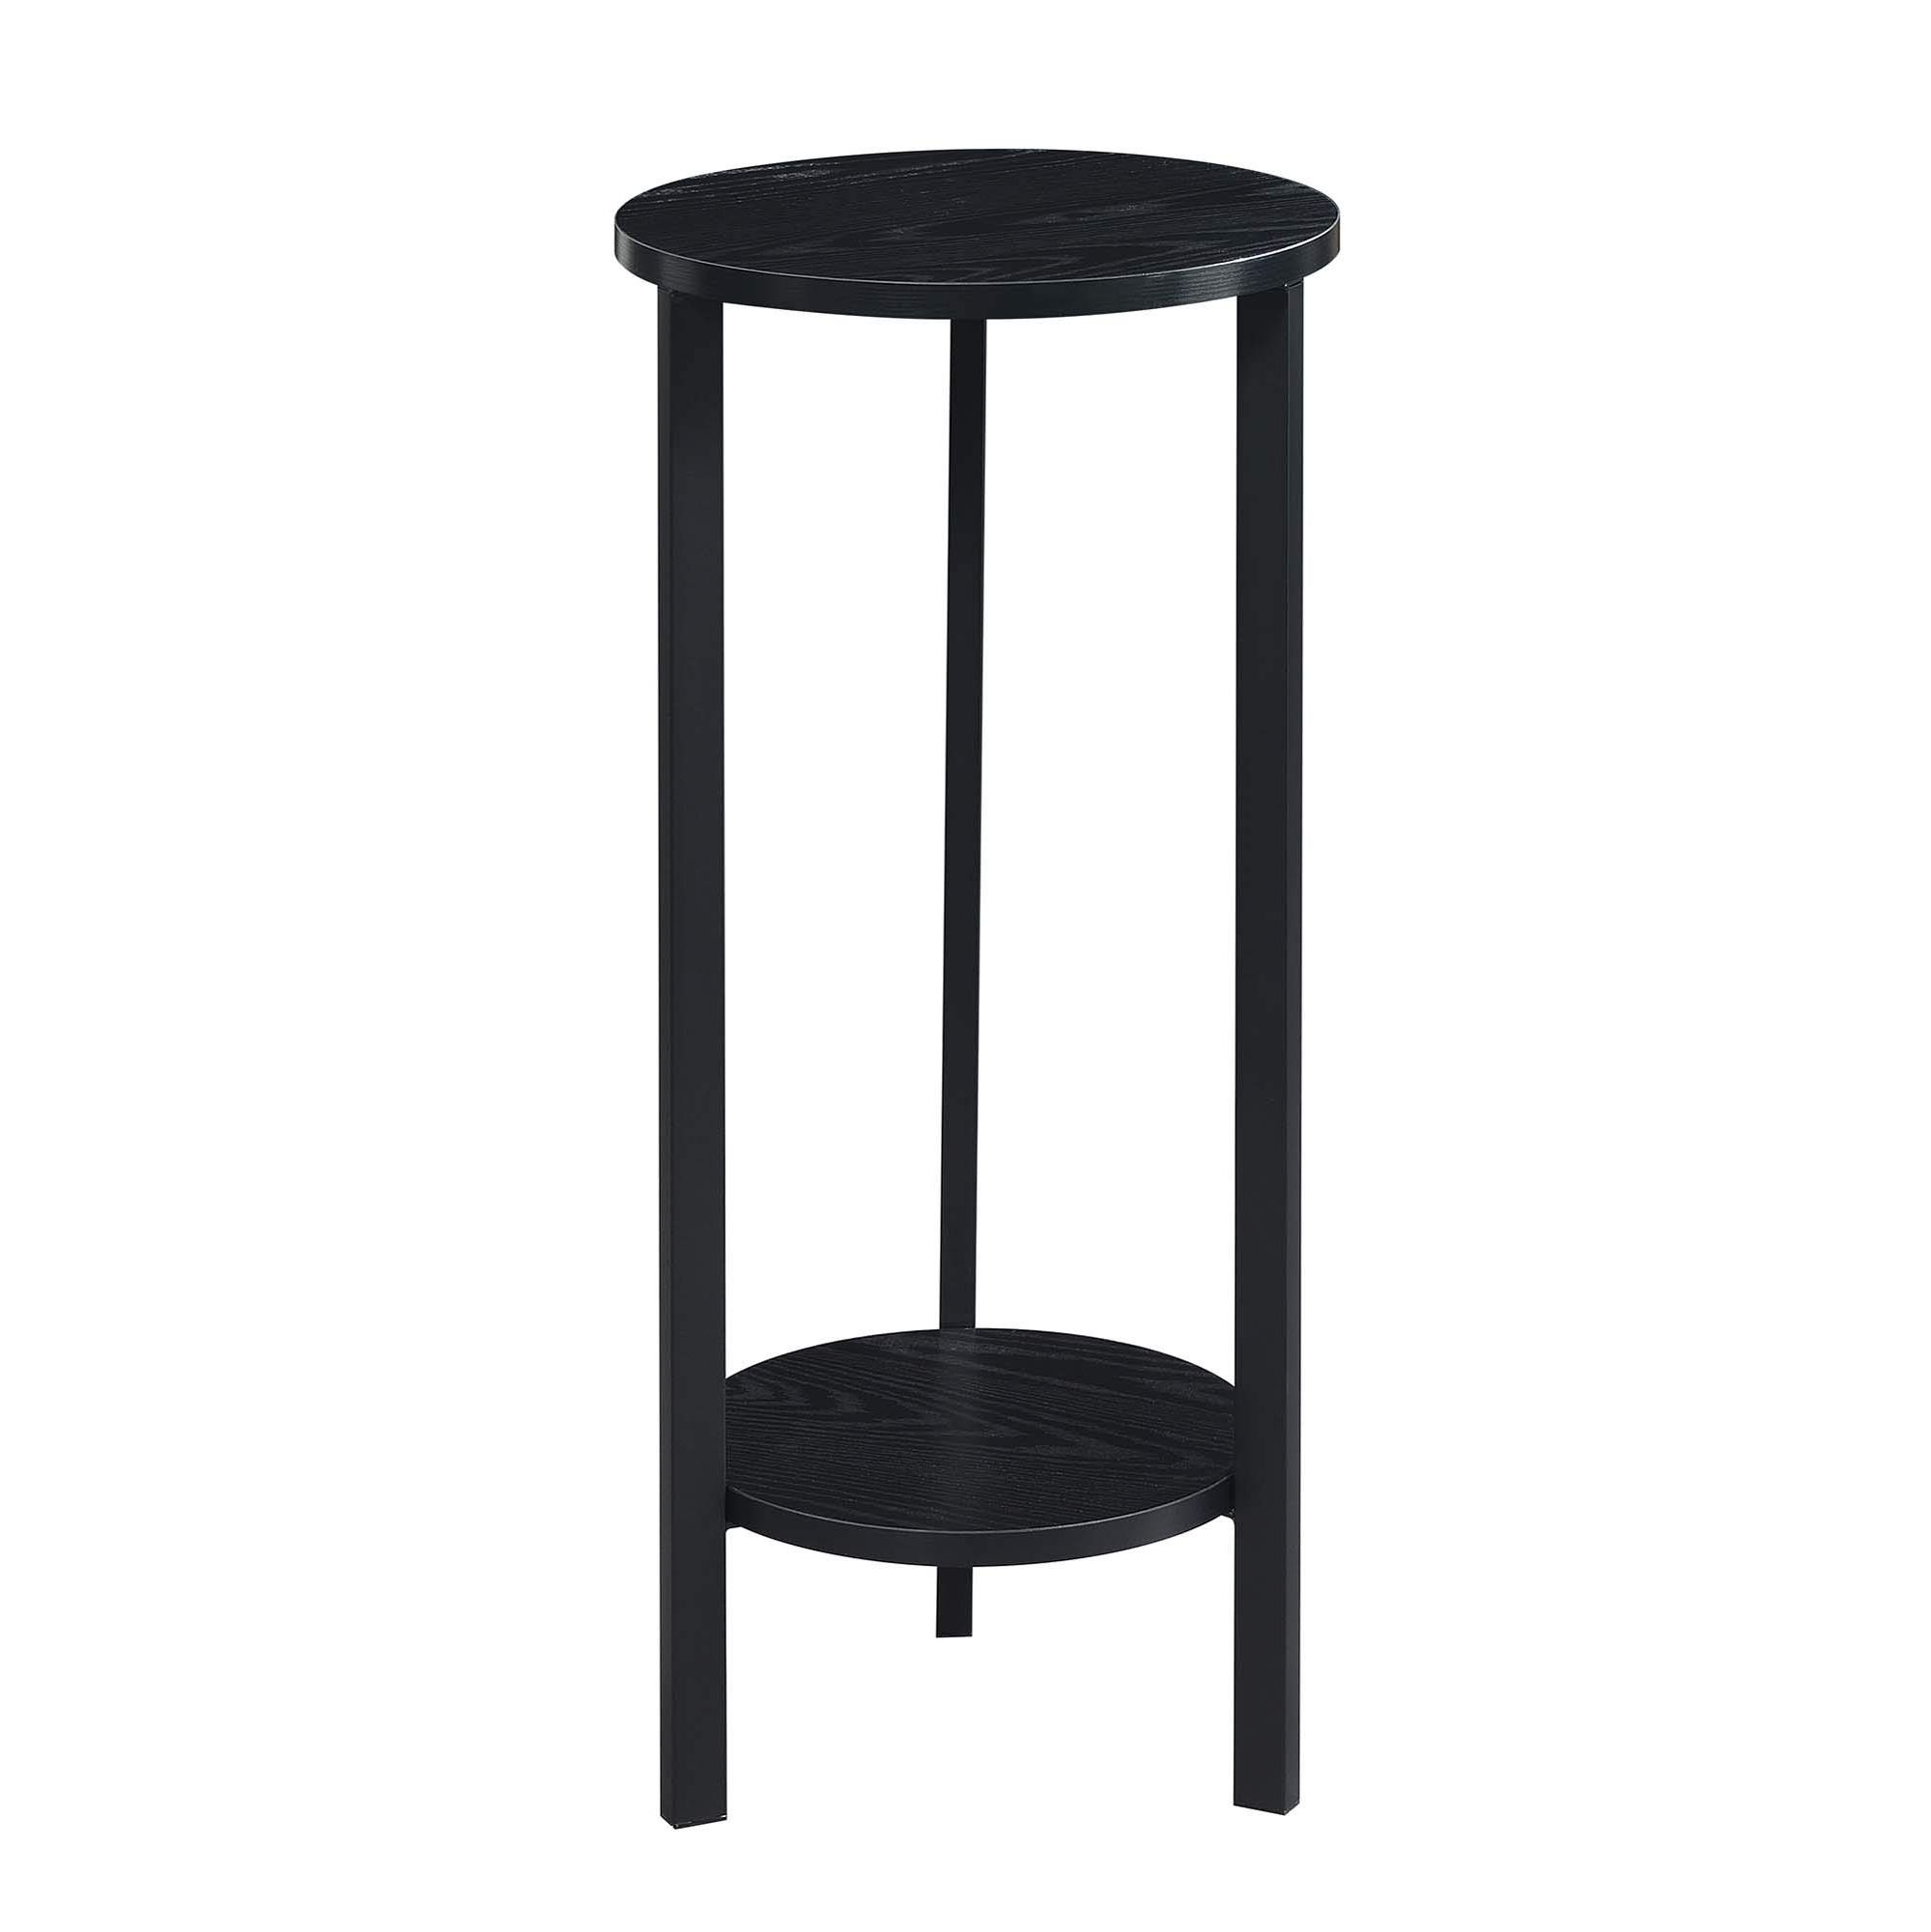 Fashionable Greystone Plant Stands In Convenience Concepts Graystone 2 Tier Plant Stand, 31", Black/black (View 6 of 10)